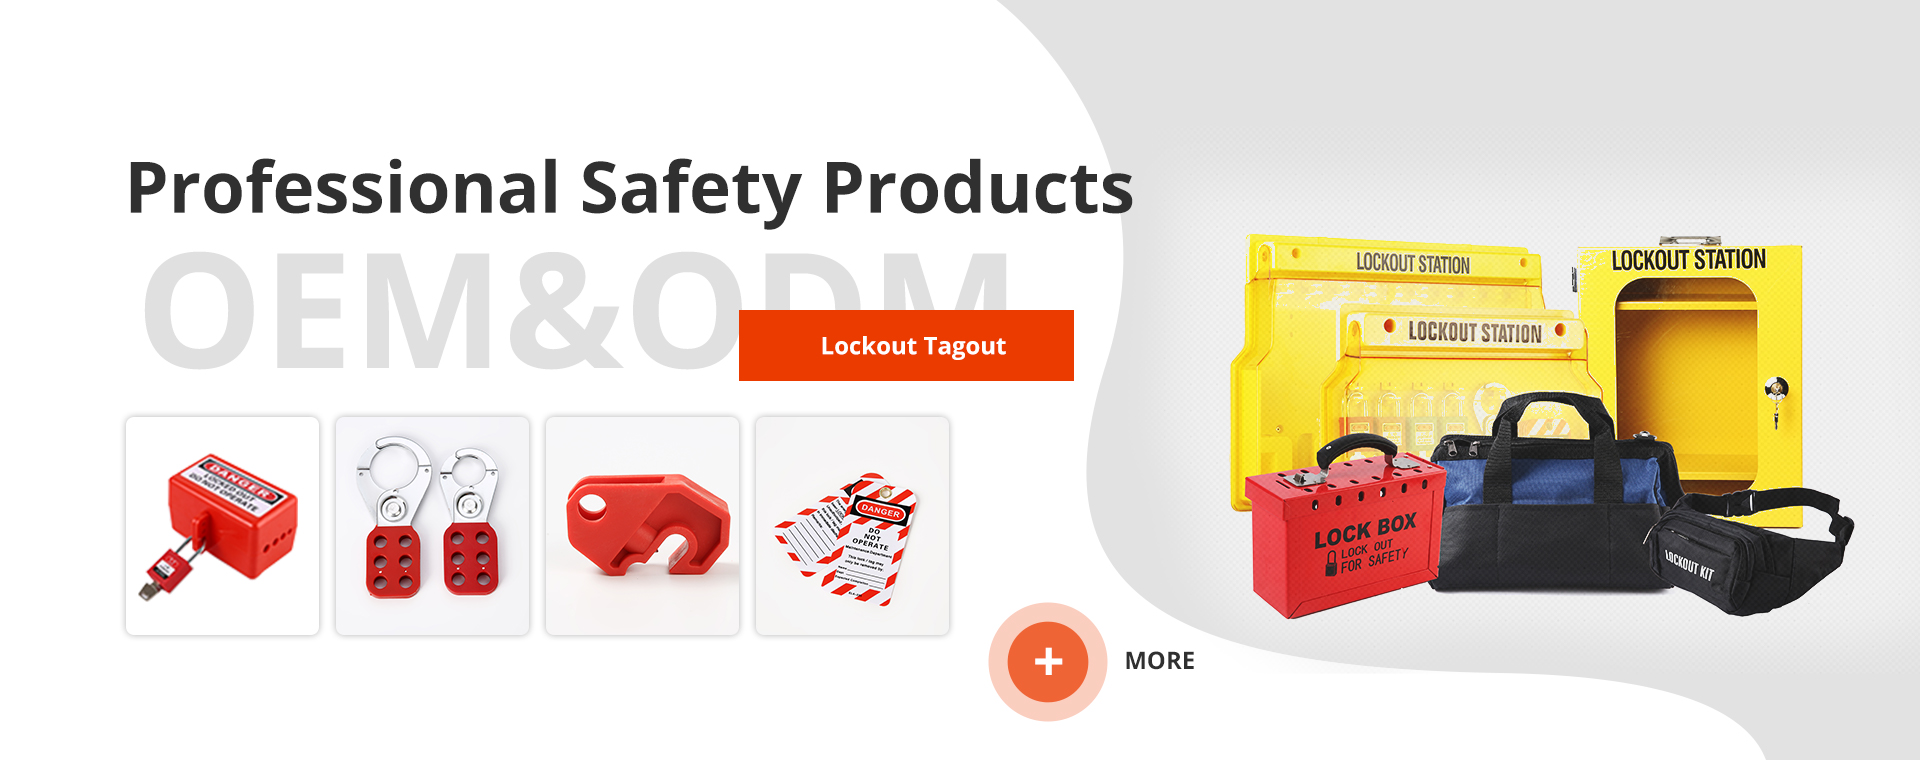 Safety Lockout, Cable Locks, Lock And Key - BOYUE